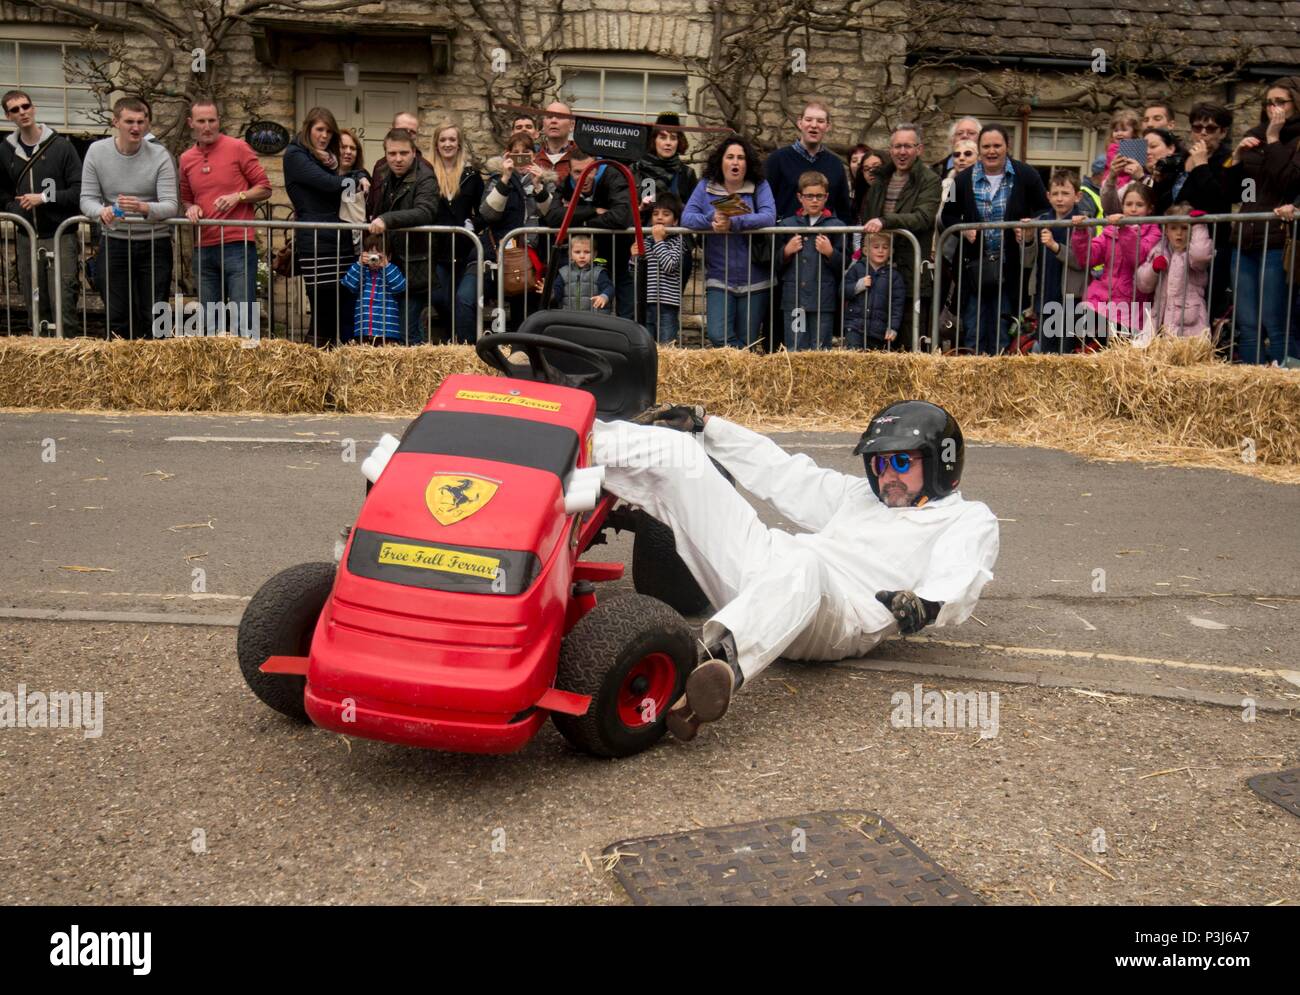 Wacky Races take place in Tetbury, run by the Lions Club 02/05/2016 Stock Photo